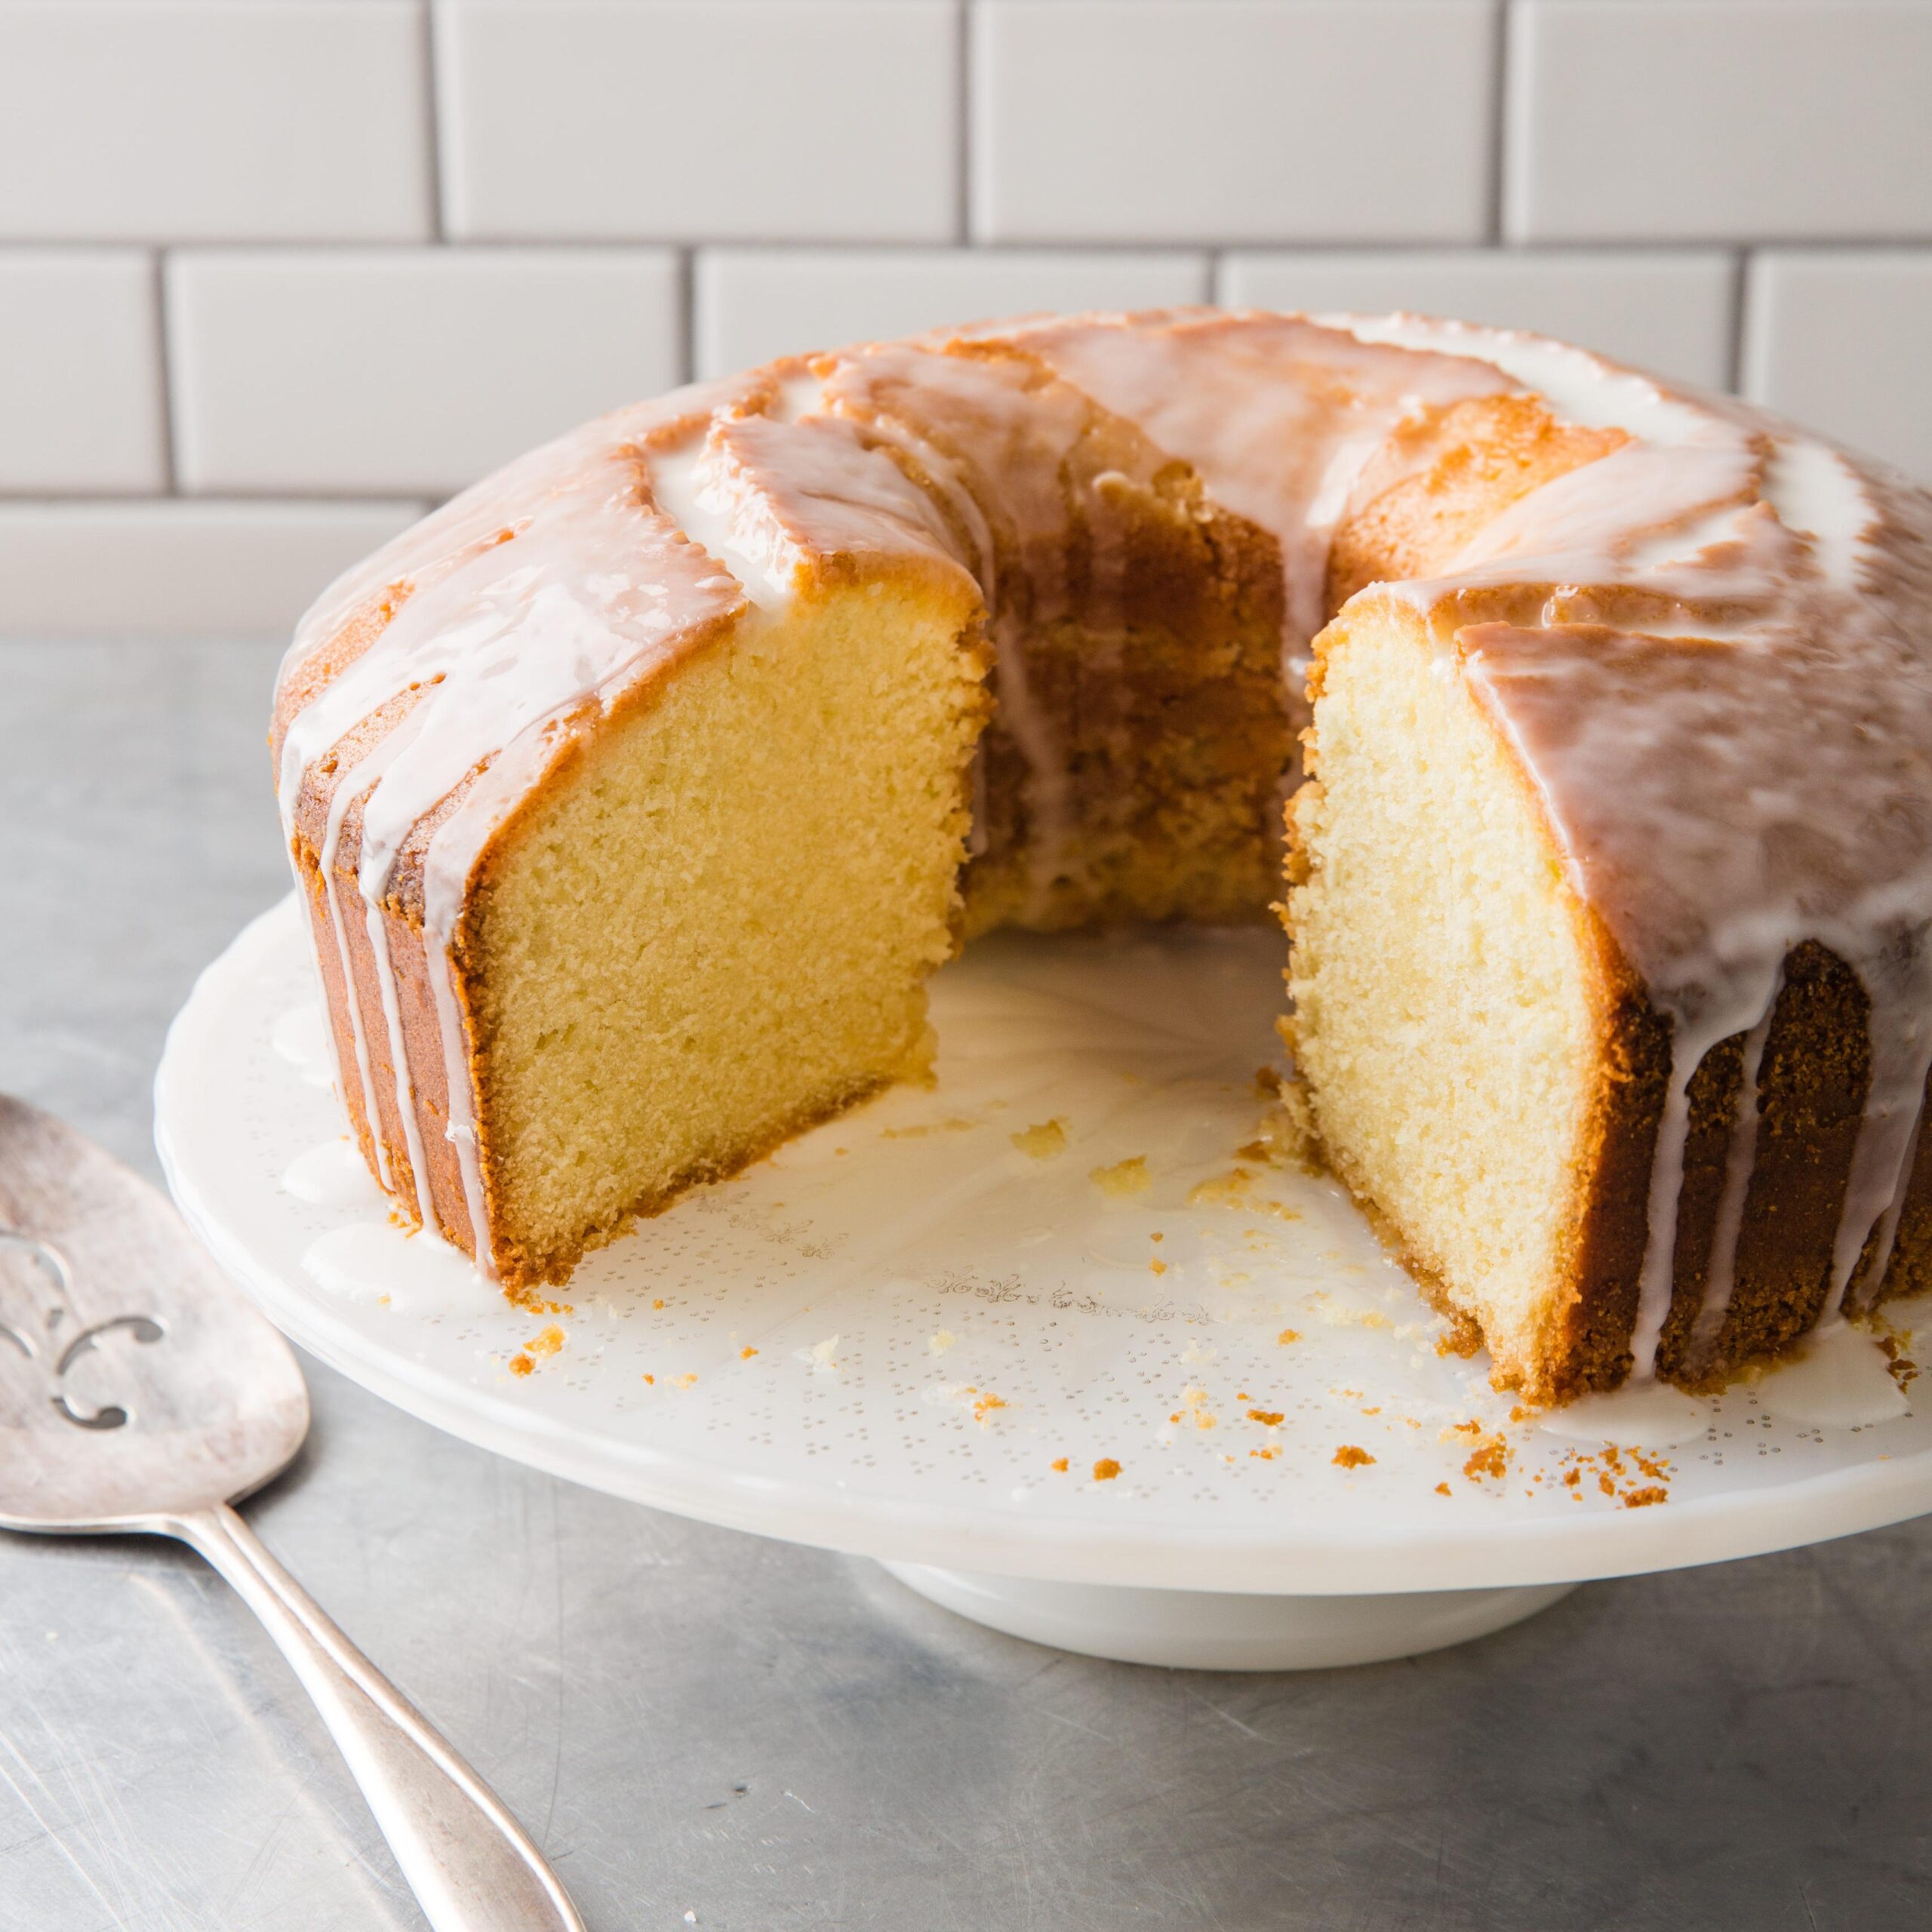  A pound cake with a unique, refreshing flavor!